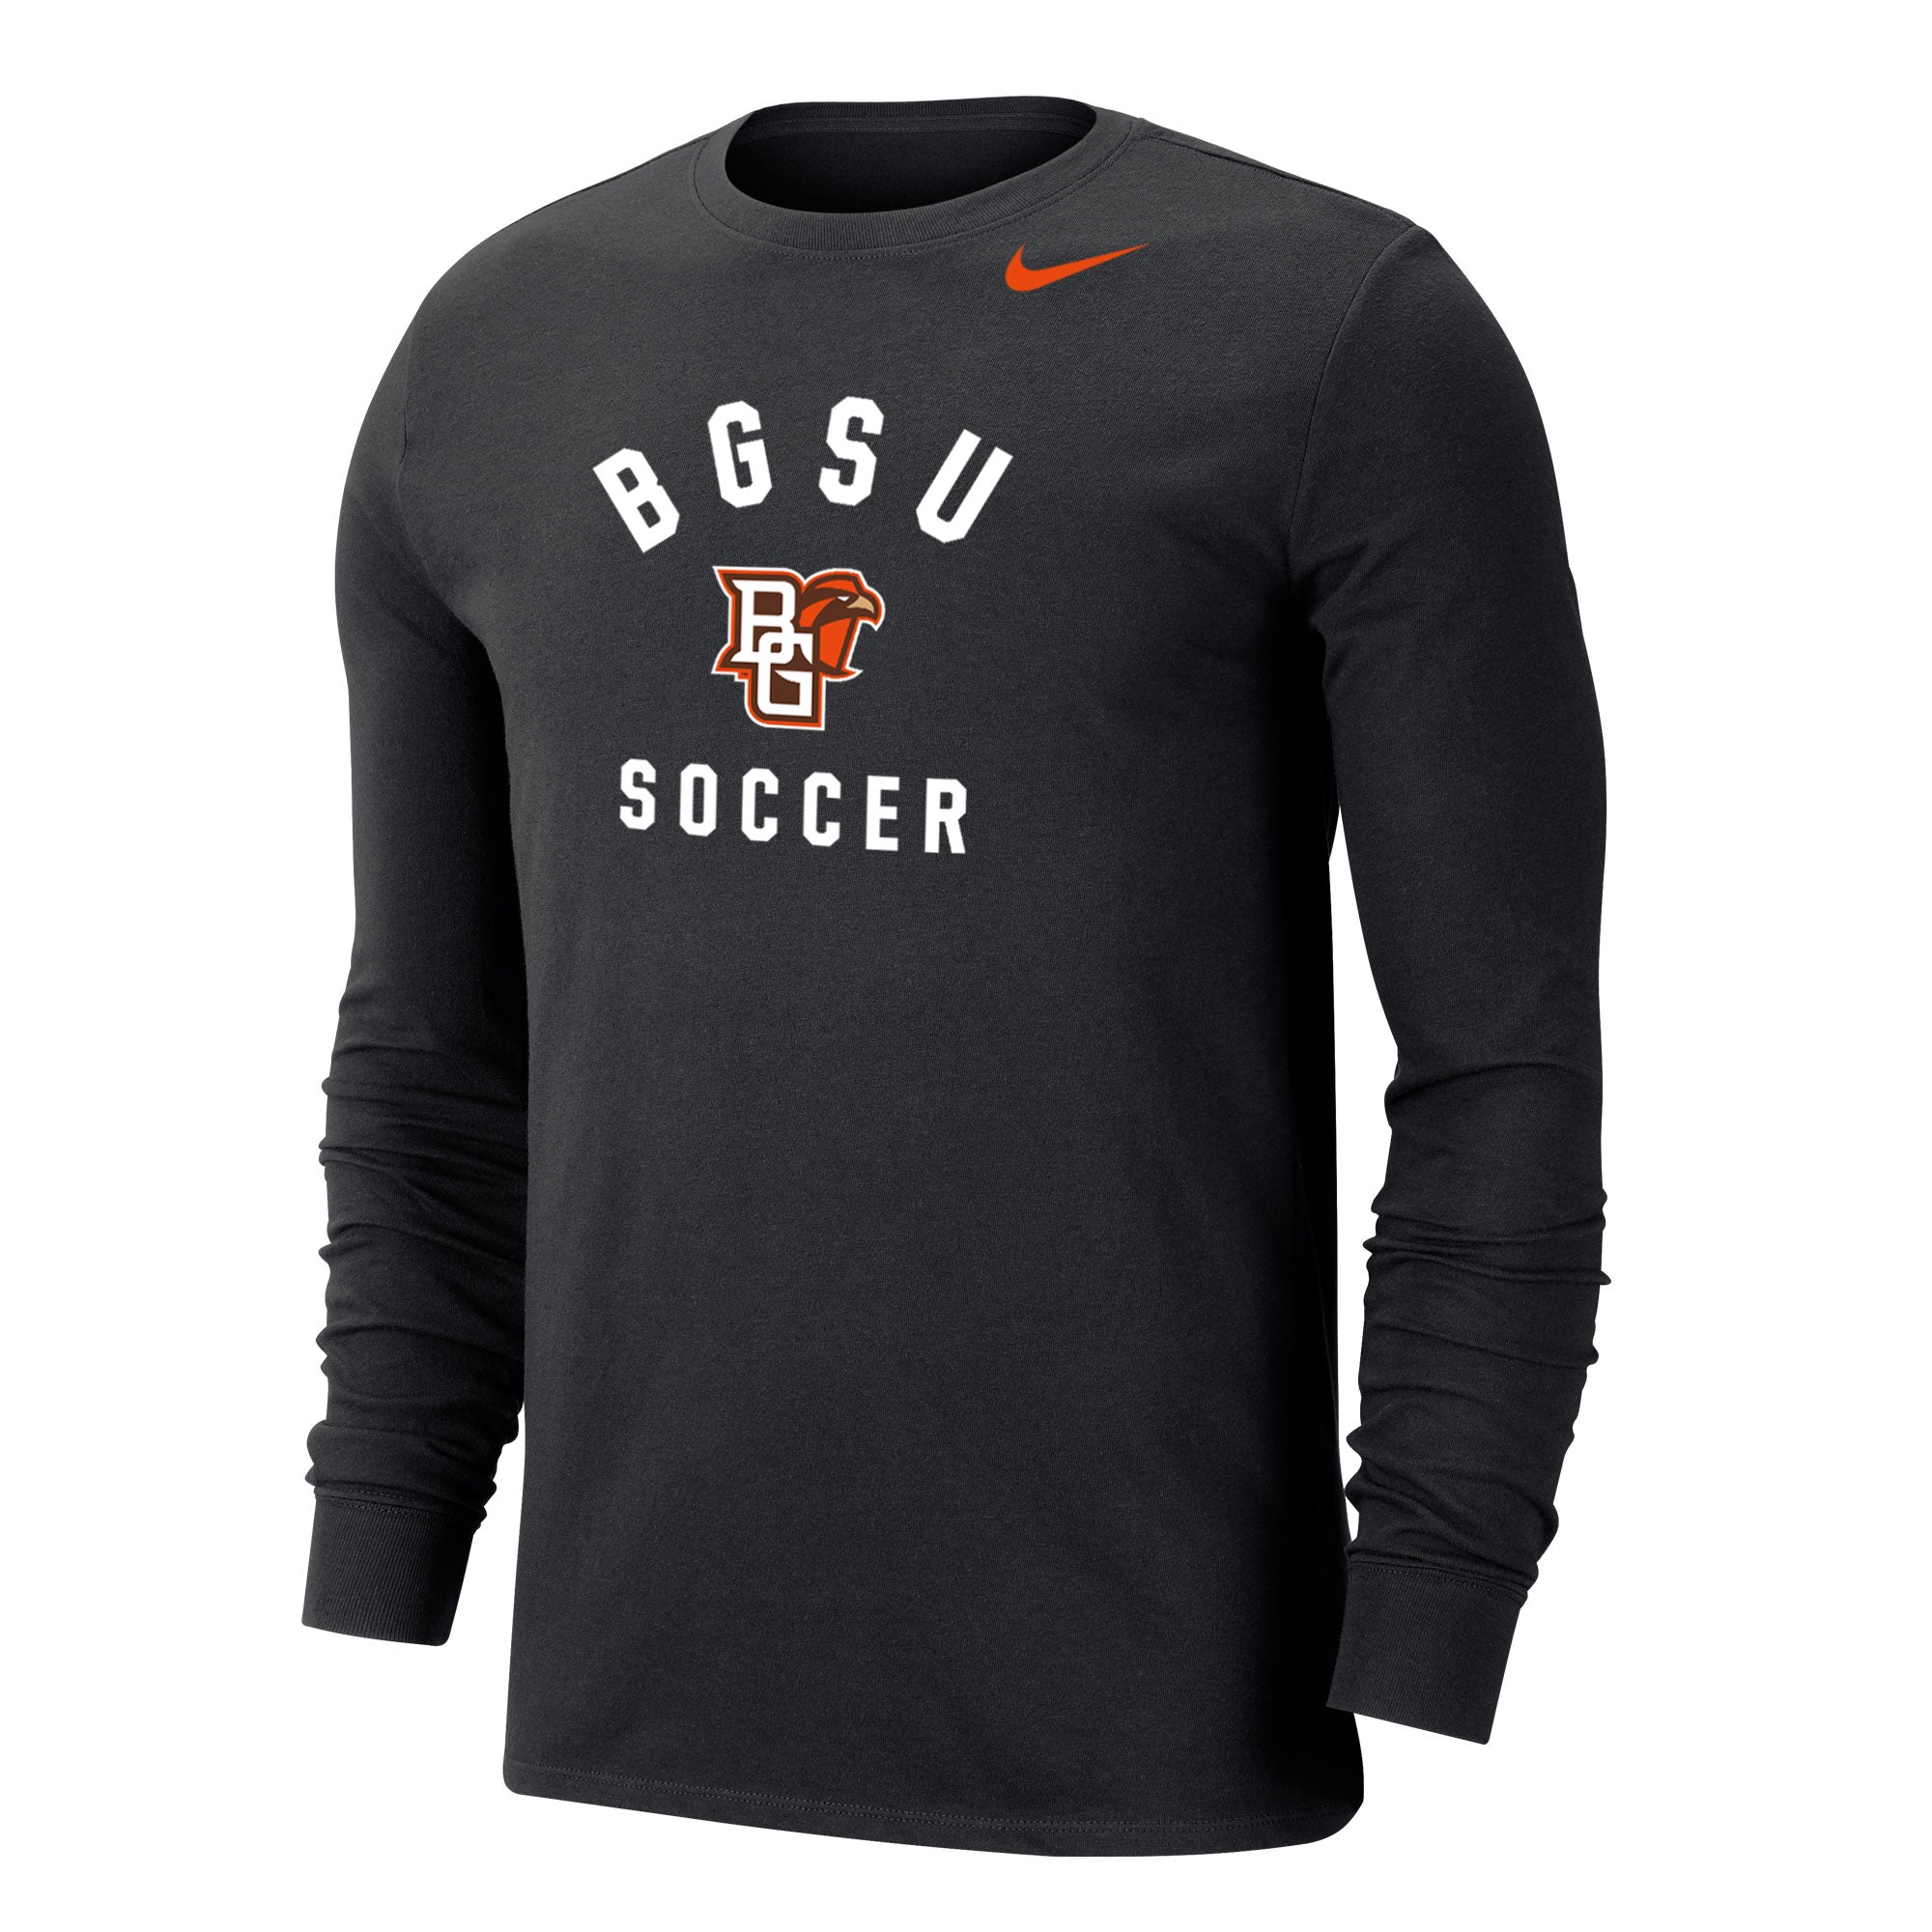 BU Dri-Fit Cotton LS - Barefoot Campus Outfitter